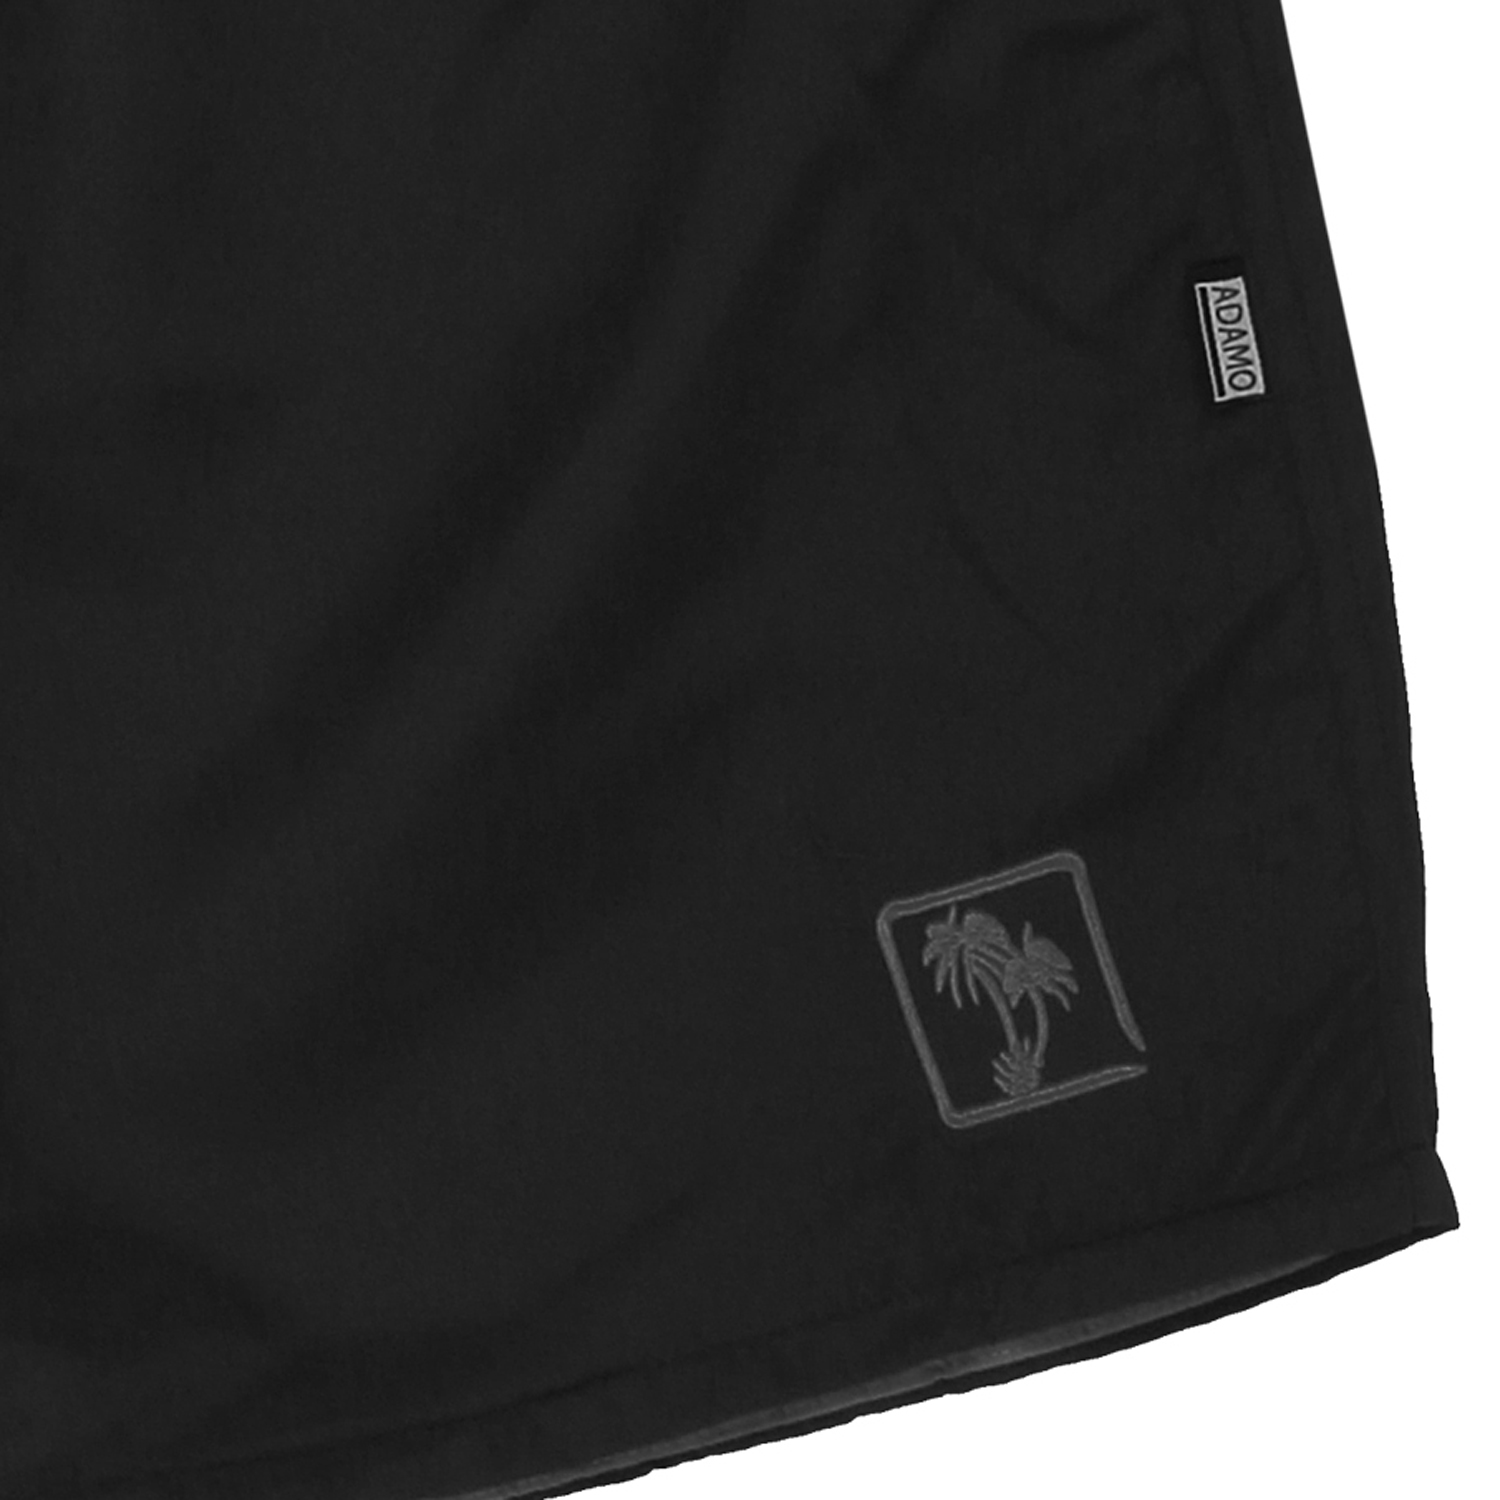 Swim shorts "Barbados" for men by Adamo in black up to oversize 10XL